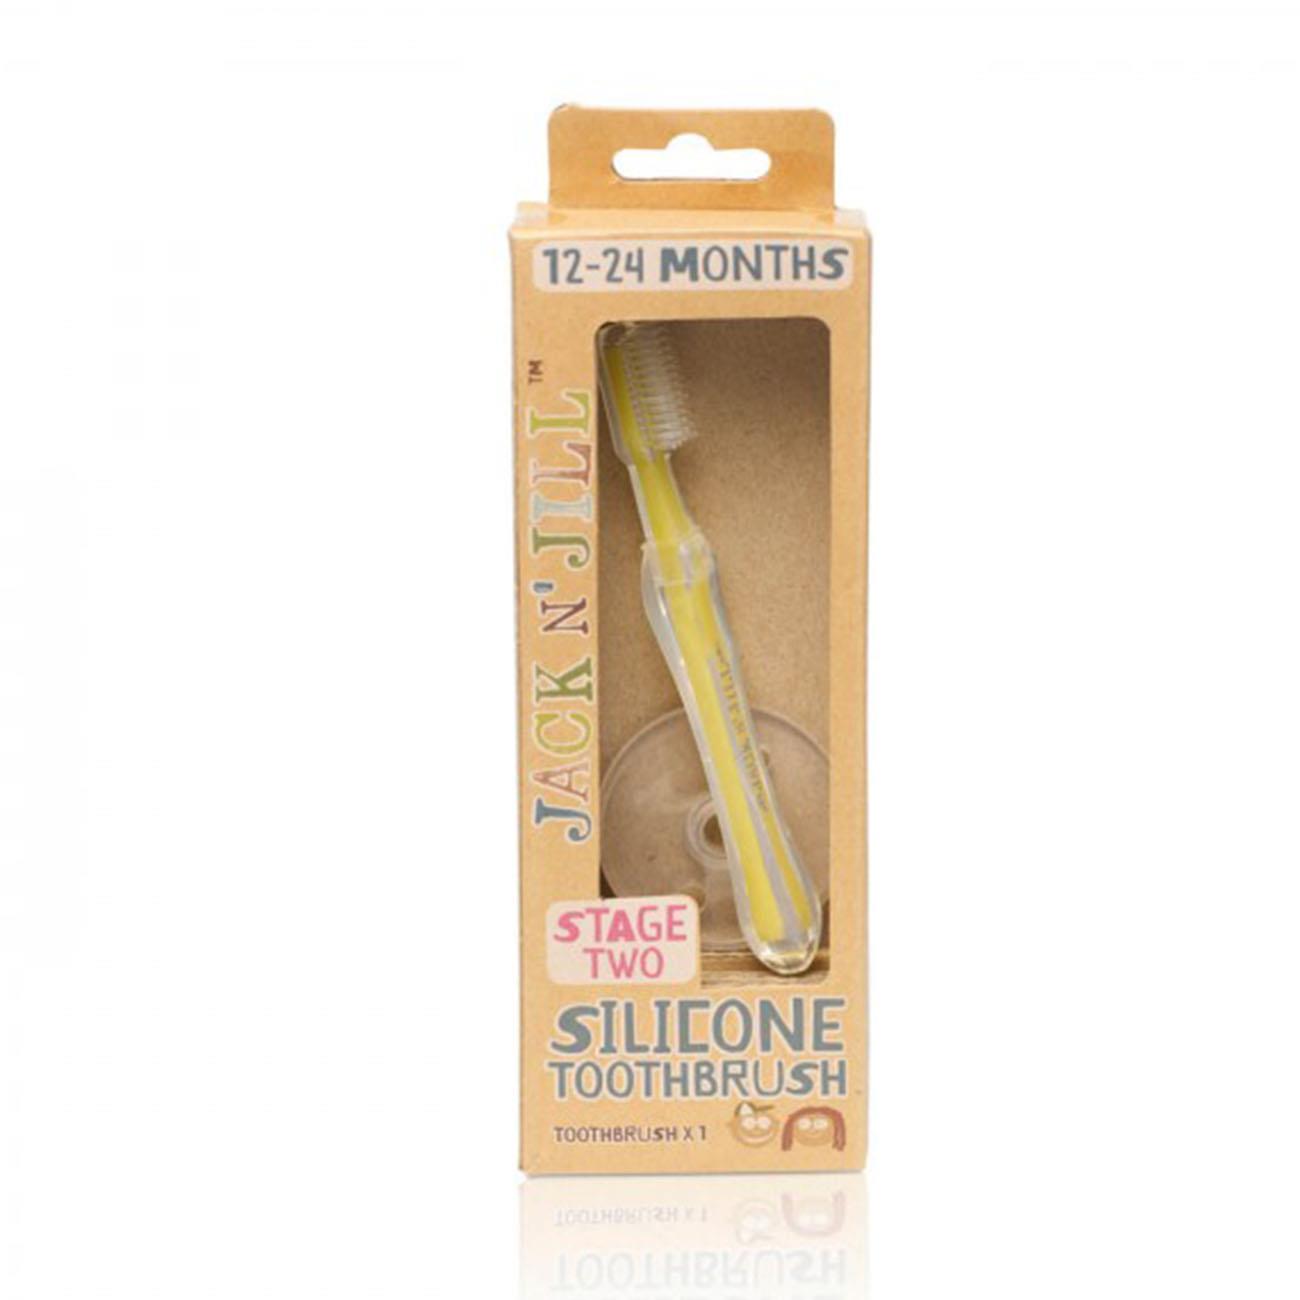 Silicone Toothbrush 12-24 months